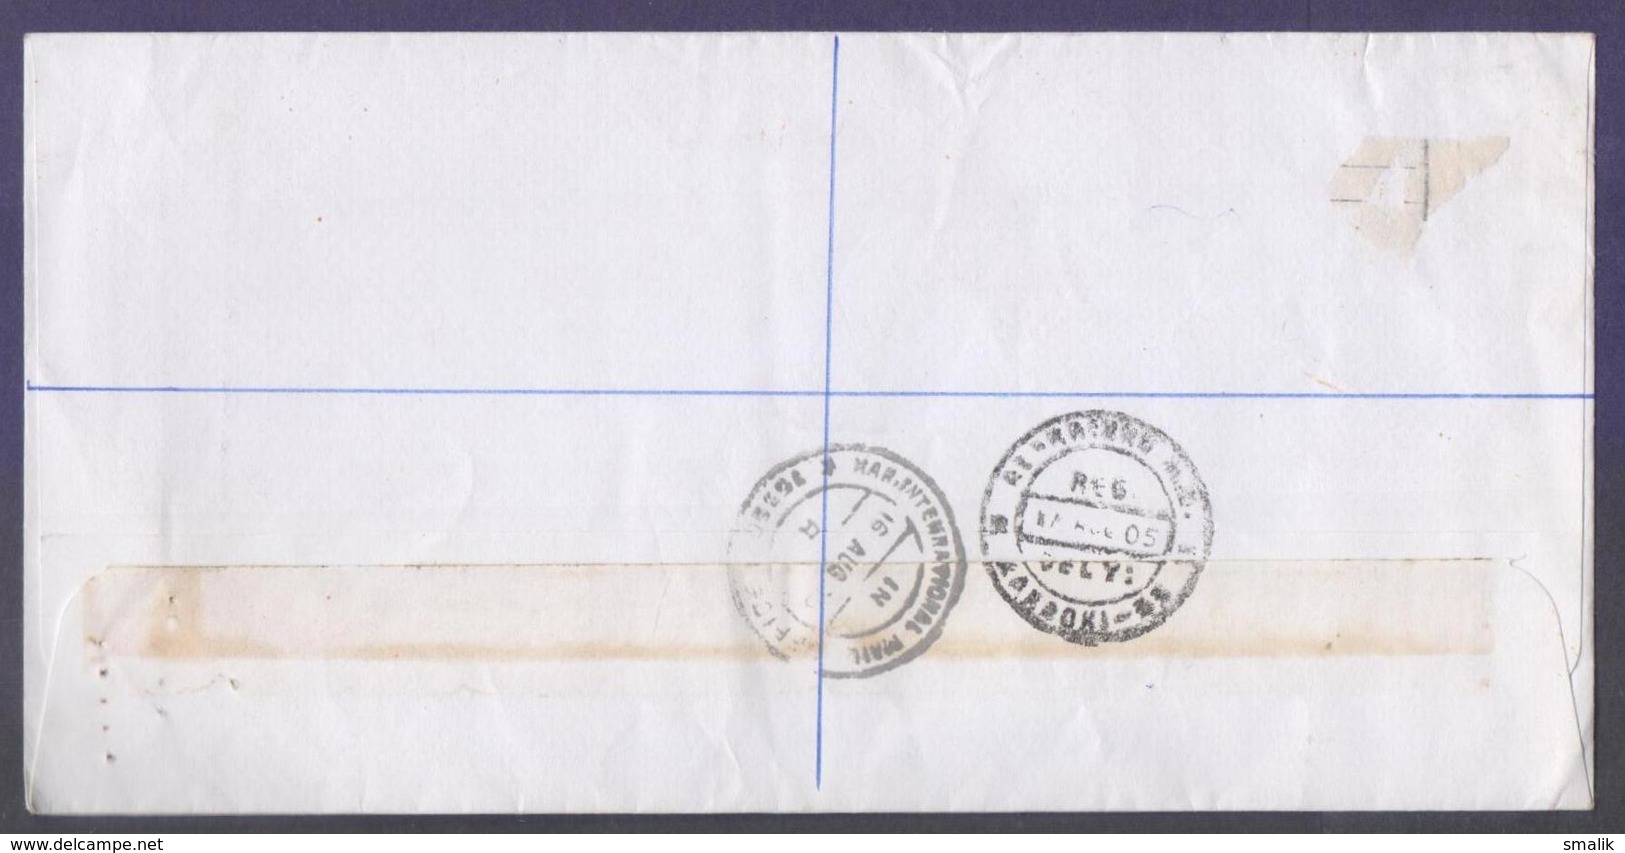 Fishes Birds, Postal History Cover From RSA SOUTH AFRICA, Registered Used 4.8.2006 And Delivery Postmark 17.8.2005 ERROR - Lettres & Documents